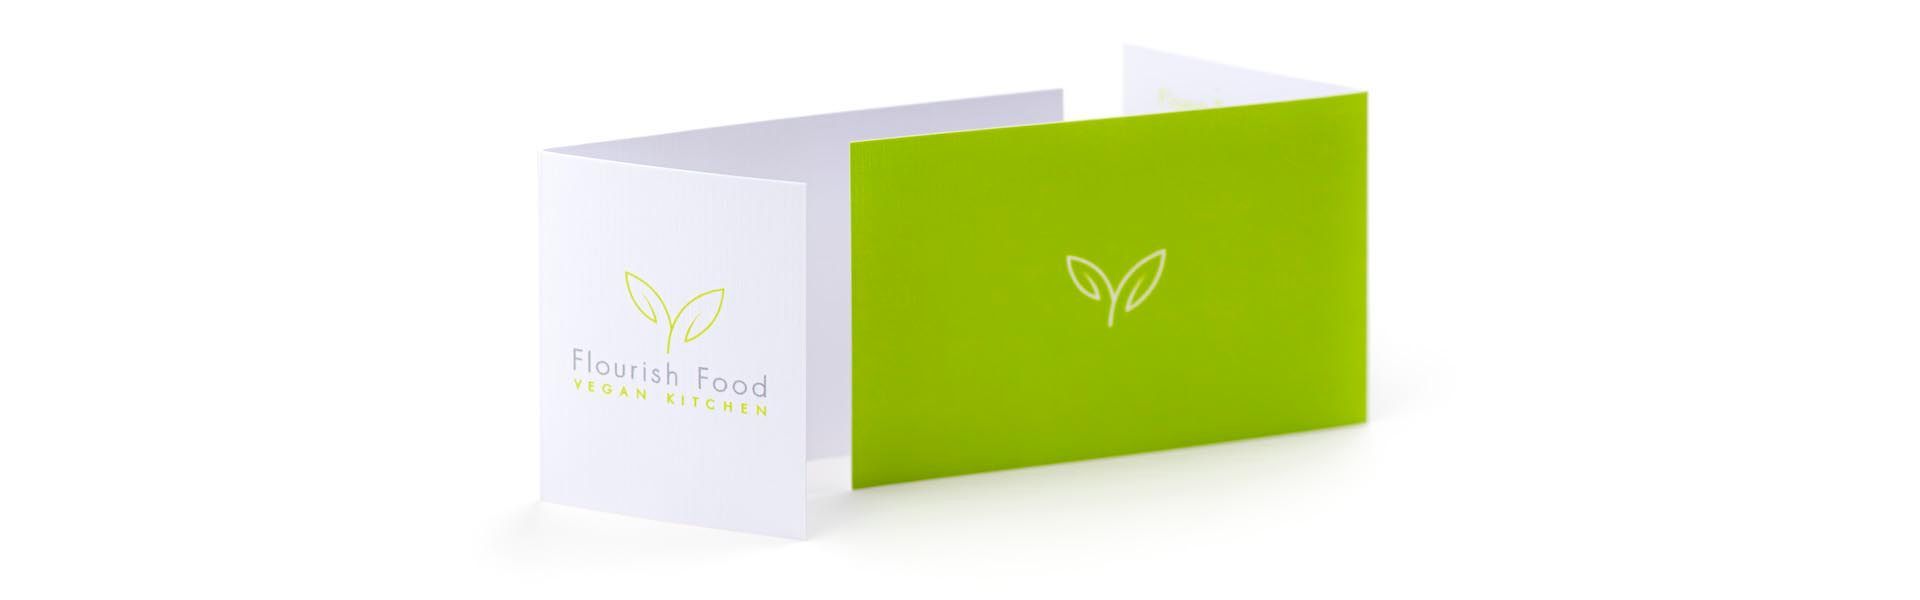 a green and white card for flourish food vegan kitchen